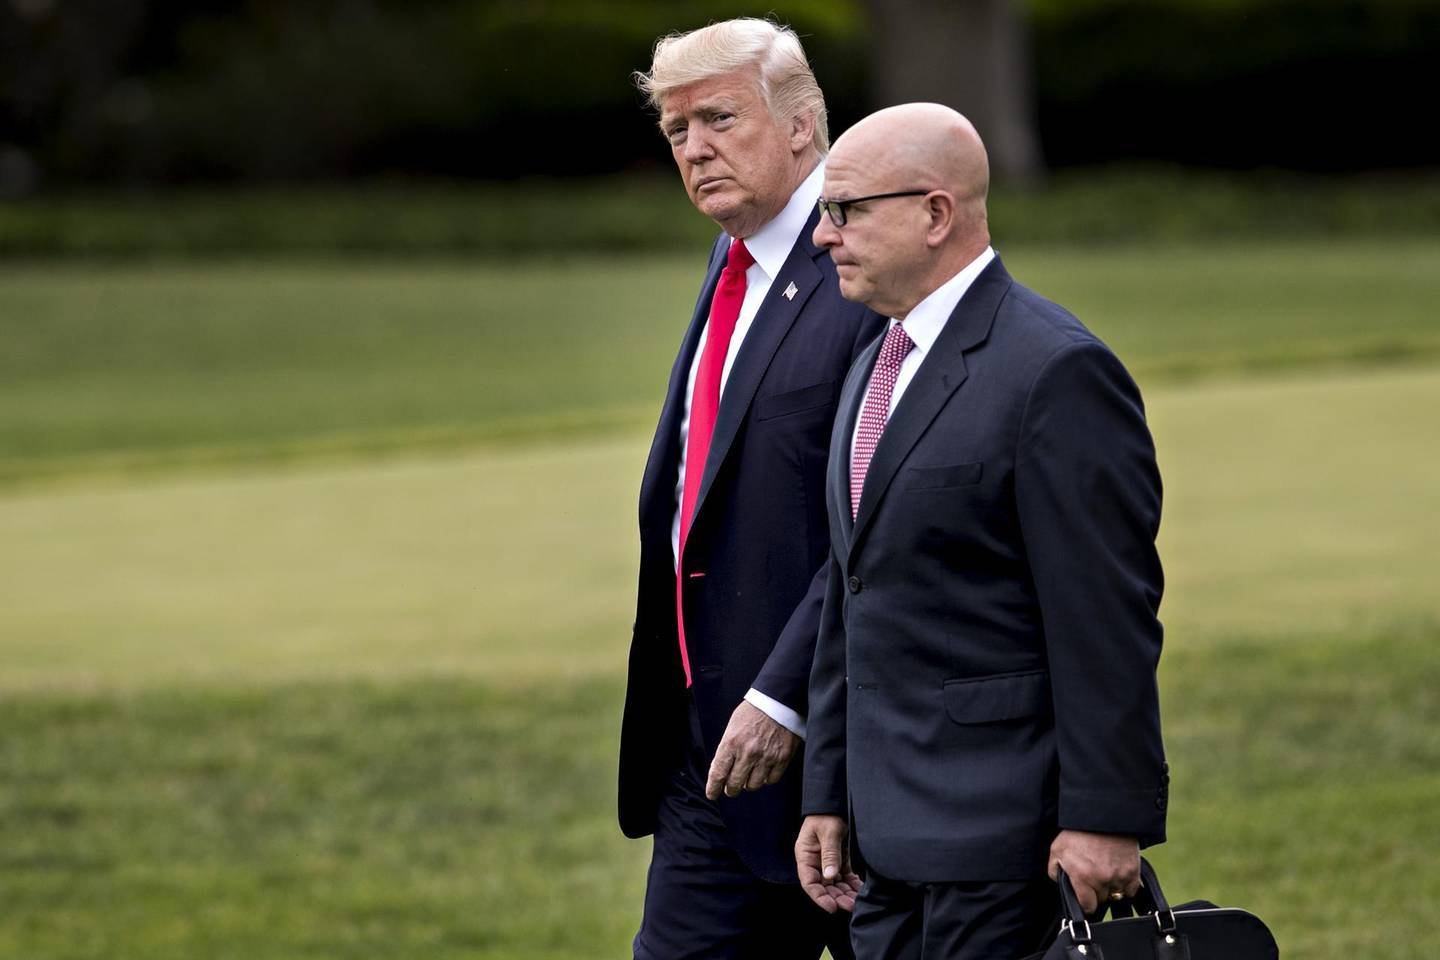 FILE: U.S. President Donald Trump, left, and H.R. McMaster, national security advisor, walk toward Marine One on the South Lawn of the White House in Washington, D.C., U.S., on Friday, June 16, 2017. President Donald Trump is replacing White House National Security Adviser McMaster with John Bolton, a former U.S. Ambassador to the United Nations famed for his hawkish views, in the latest shakeup of his administration. The move installs Trump’s third national security adviser in 14 months. McMaster joined the administration a year ago after Trump fired his predecessor, Michael Flynn, for lying to the vice president about contacts with Russia. Our editors select the best archive images on Bolton and McMaster. Photographer: Andrew Harrer/Bloomberg